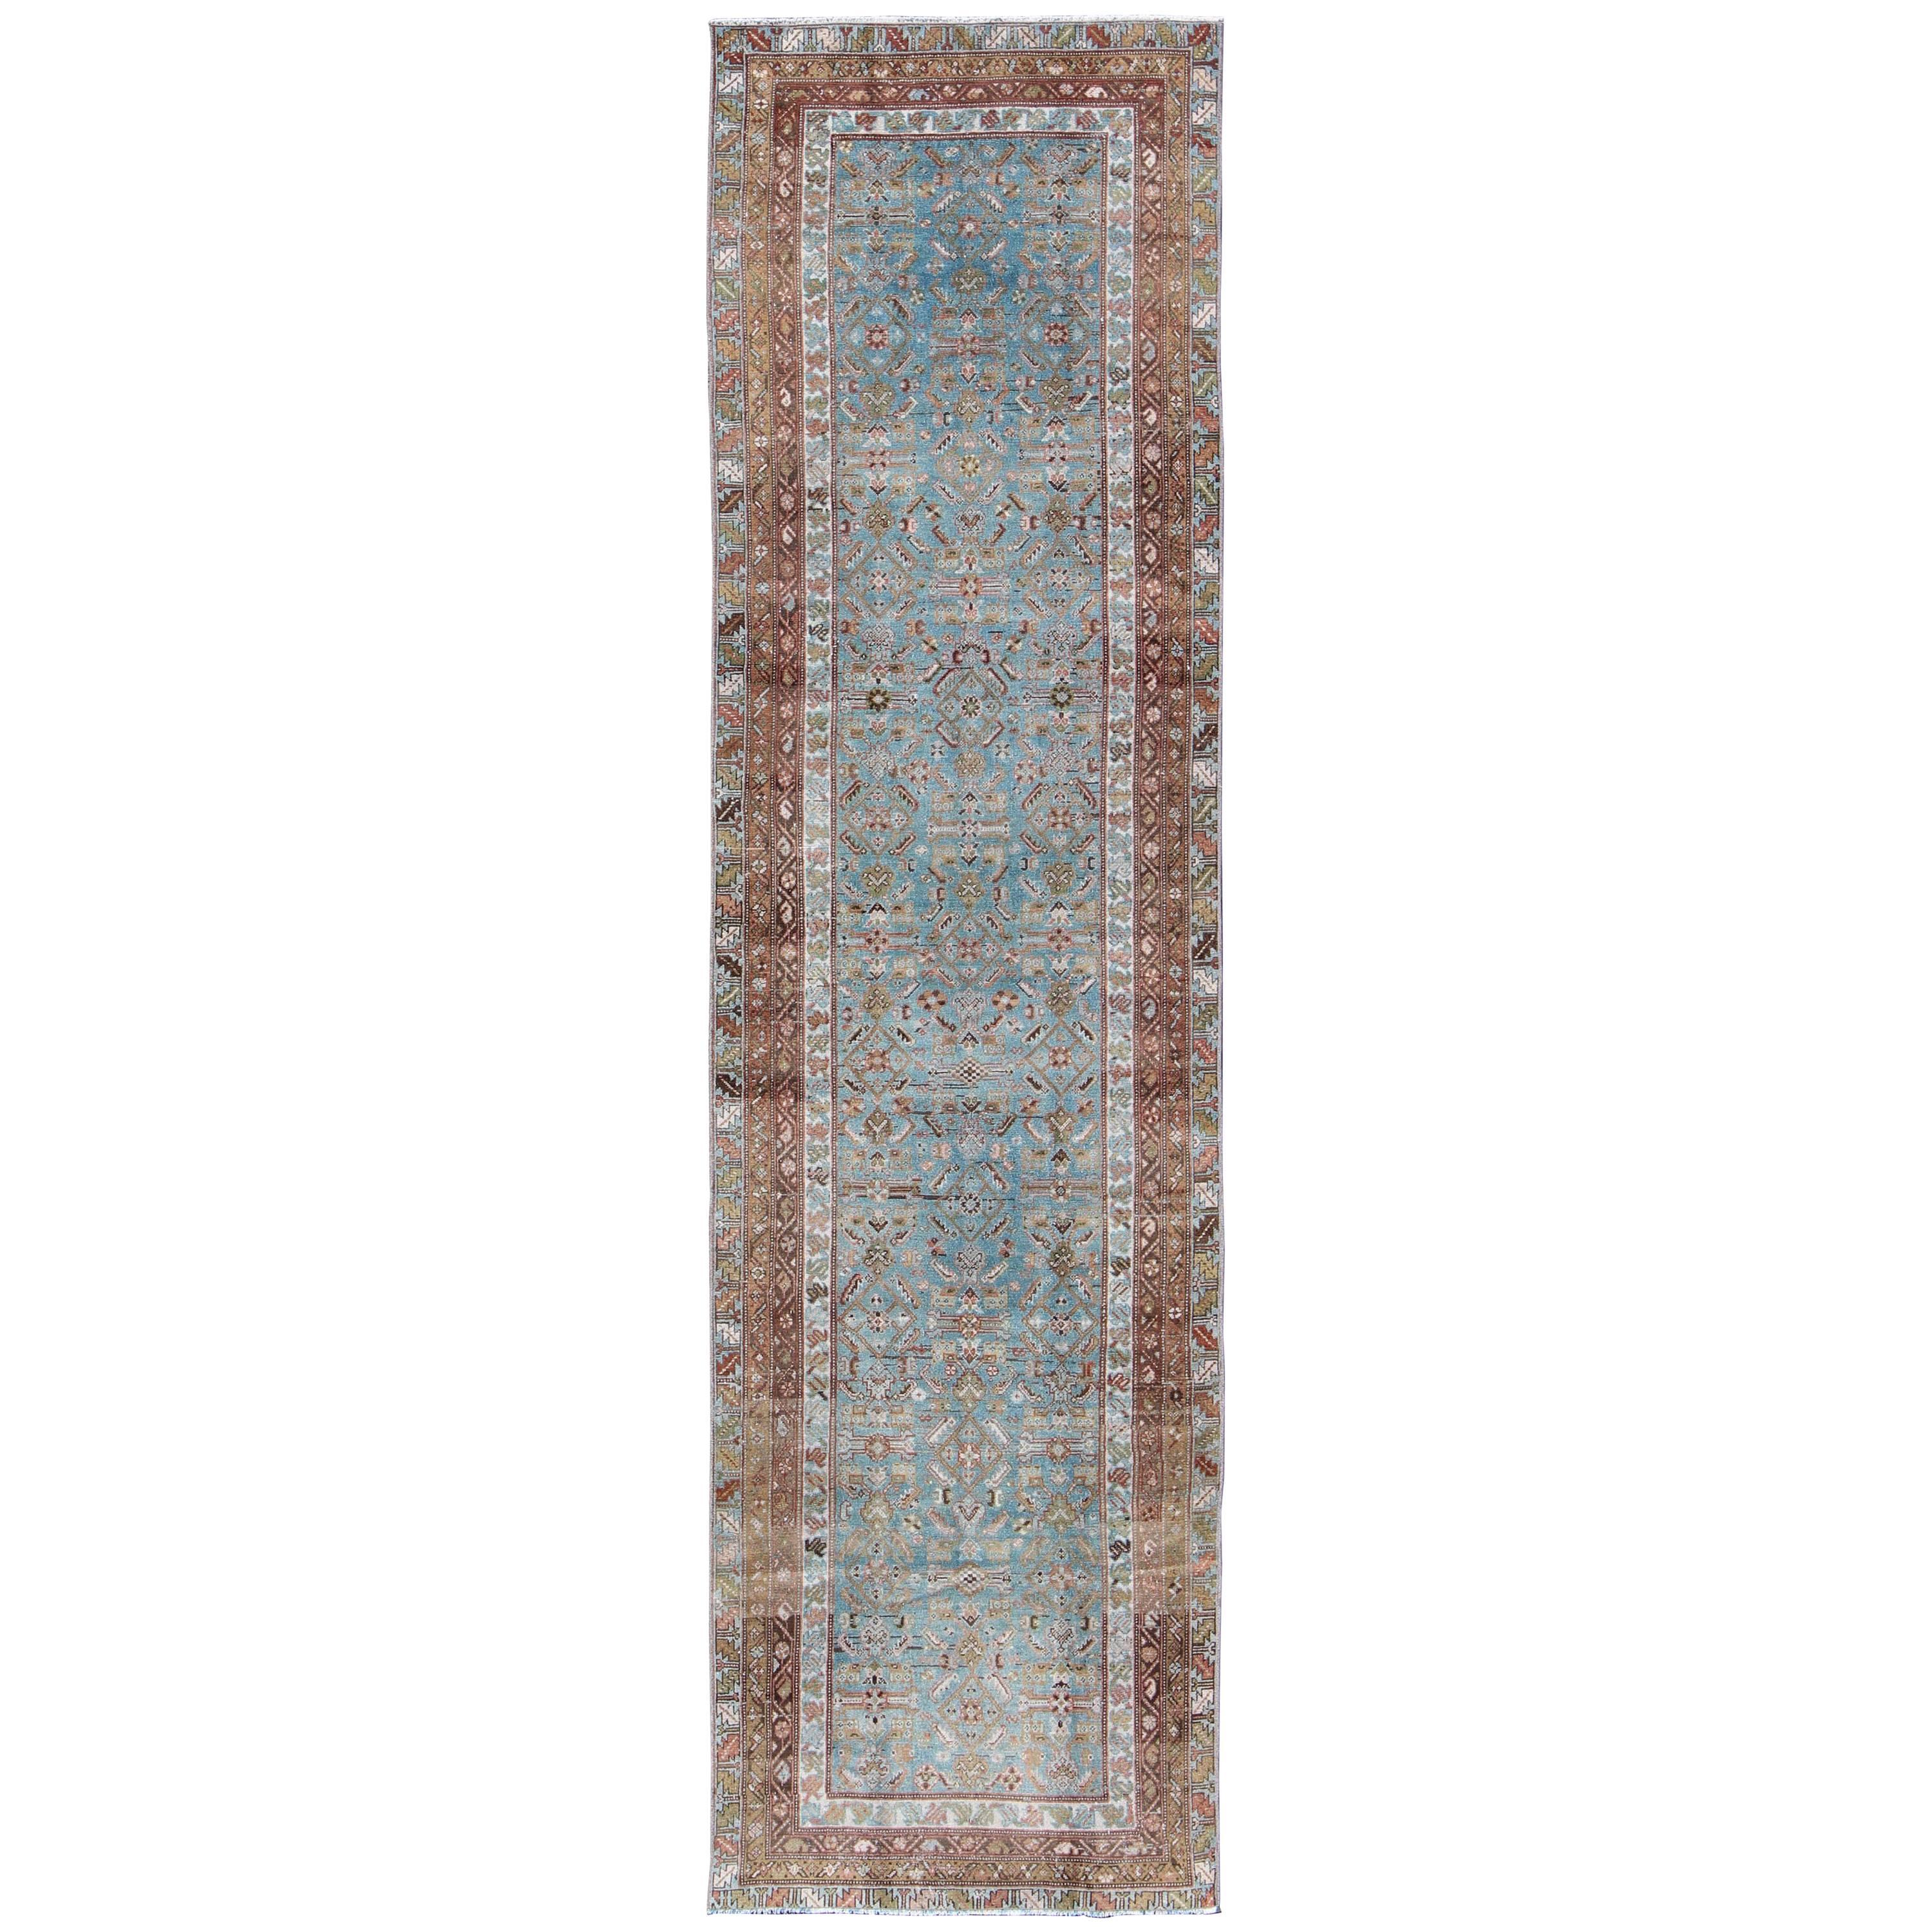 Antique Persian Malayer Rug with Floral Design in Blue and Brown Tones